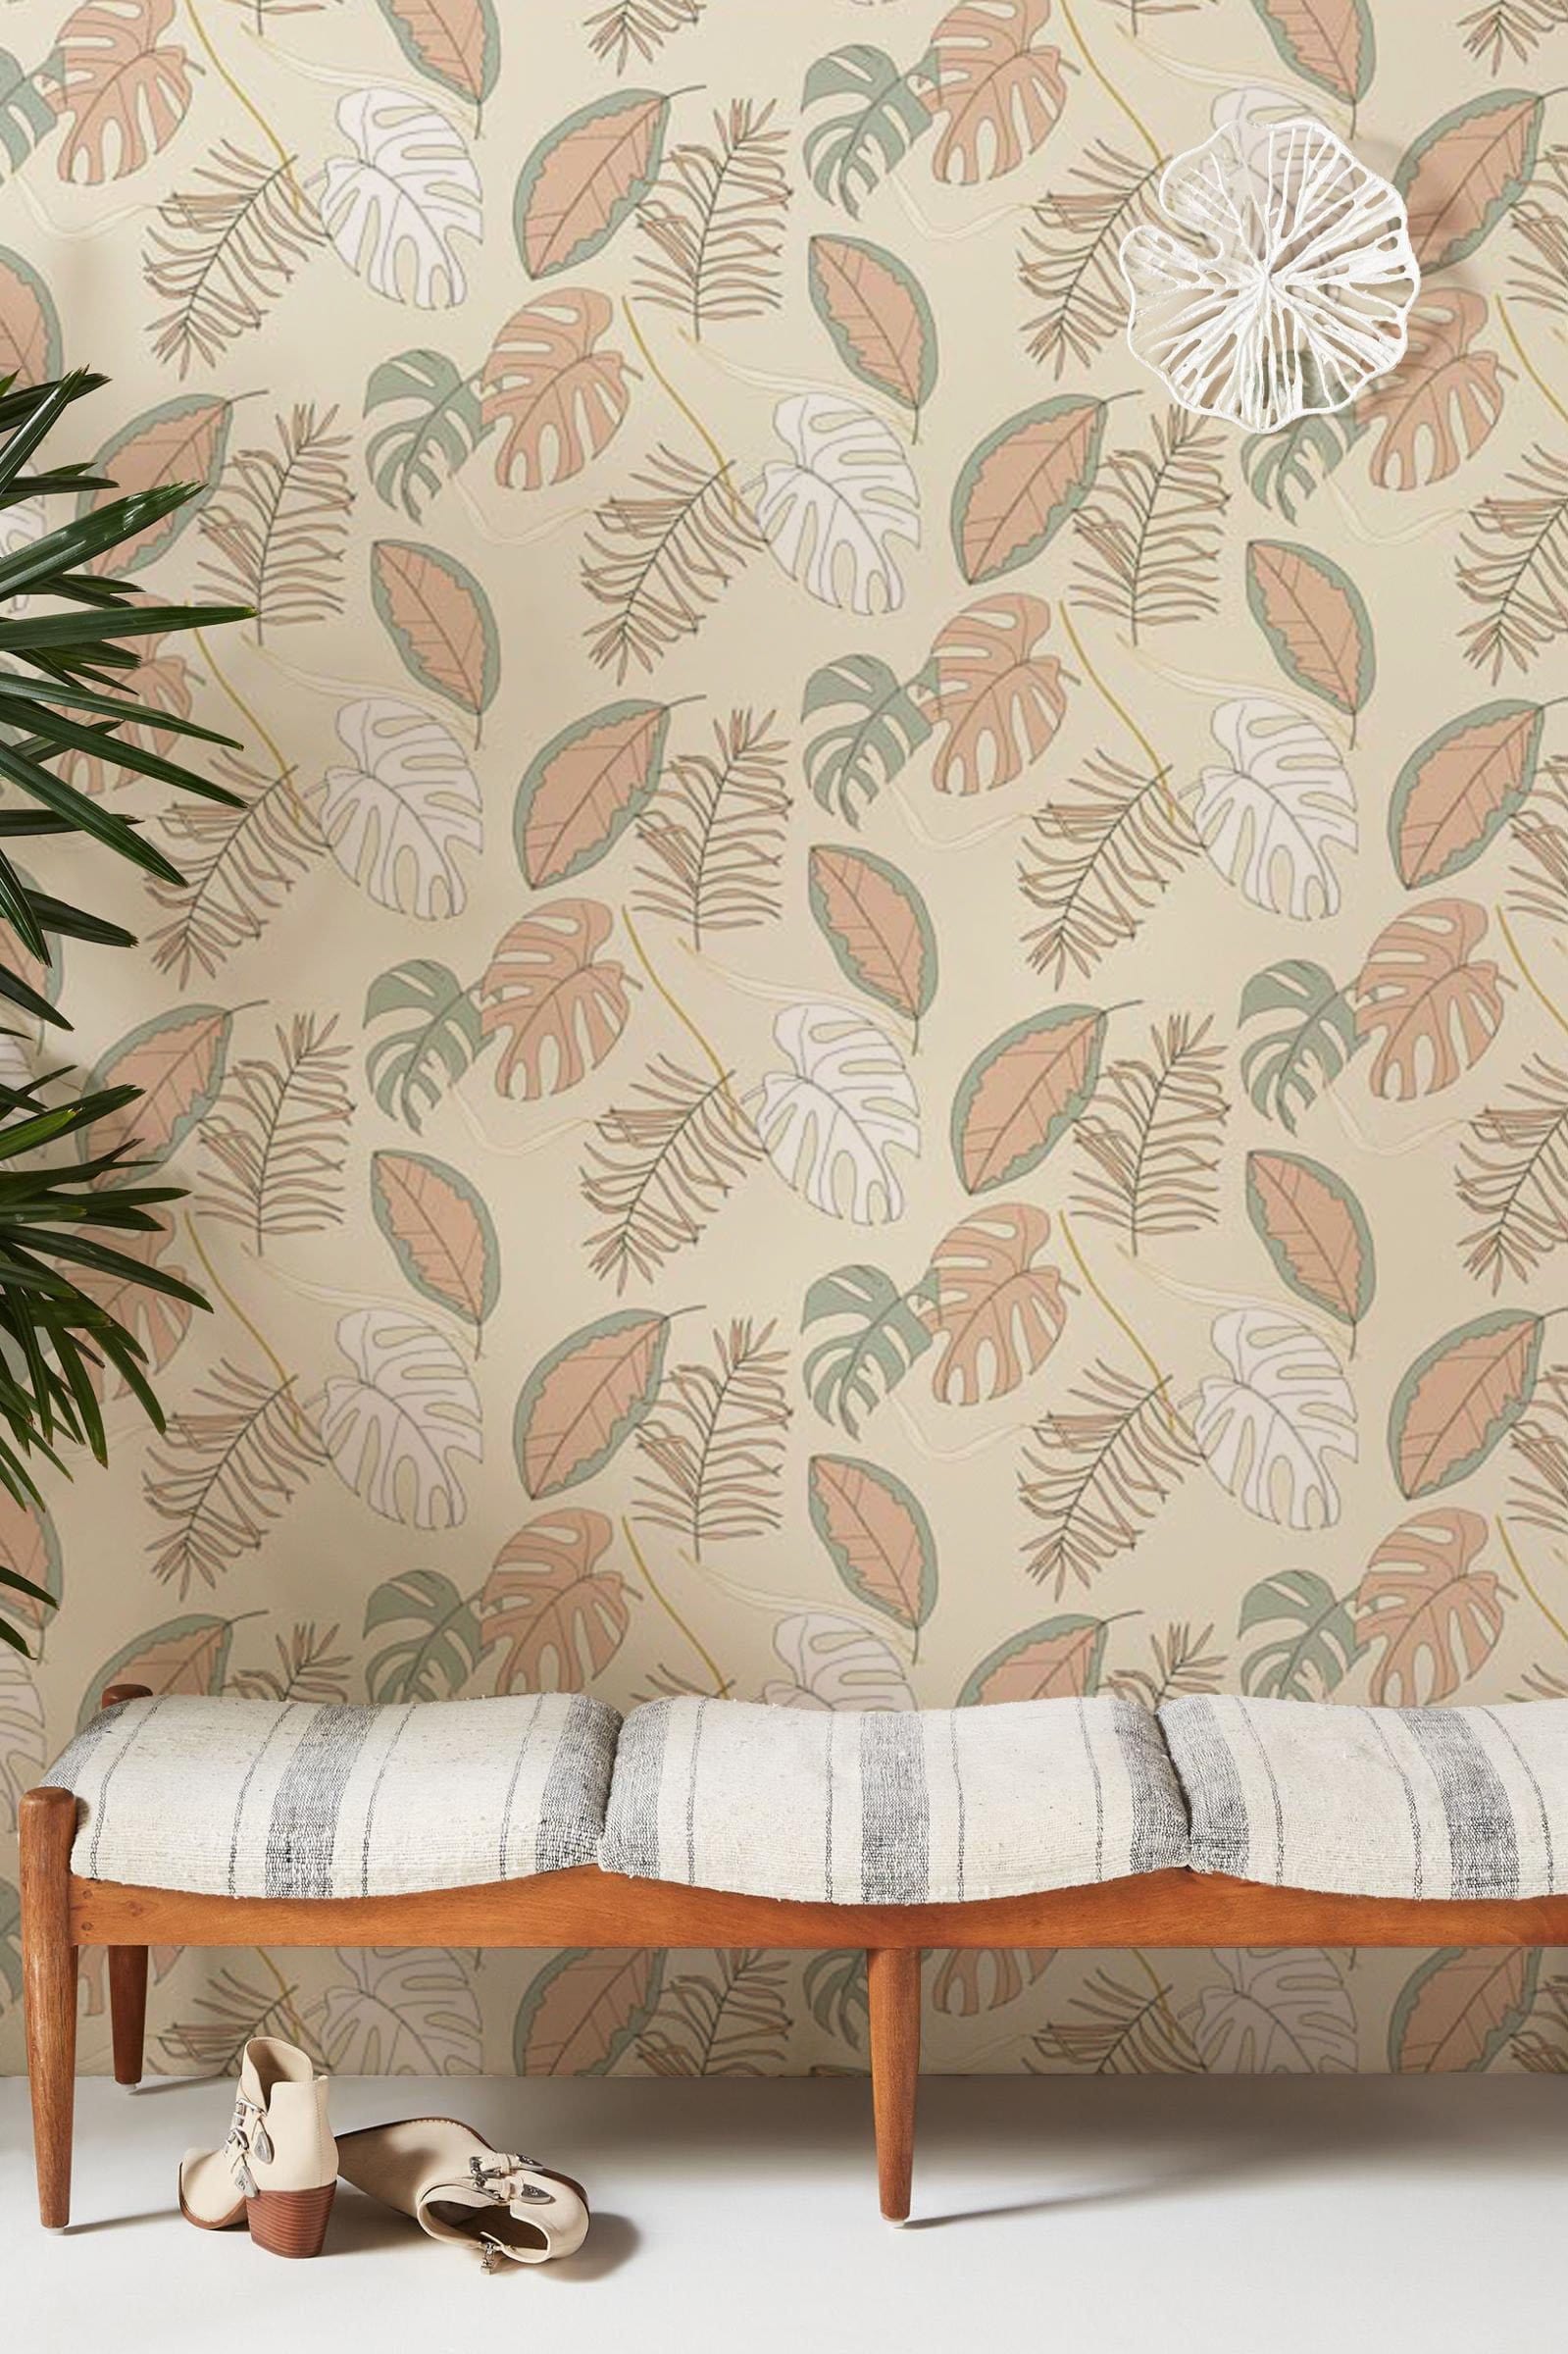 Wallpaper mural featuring a collection of different species of leaves, ideal for use in hallways